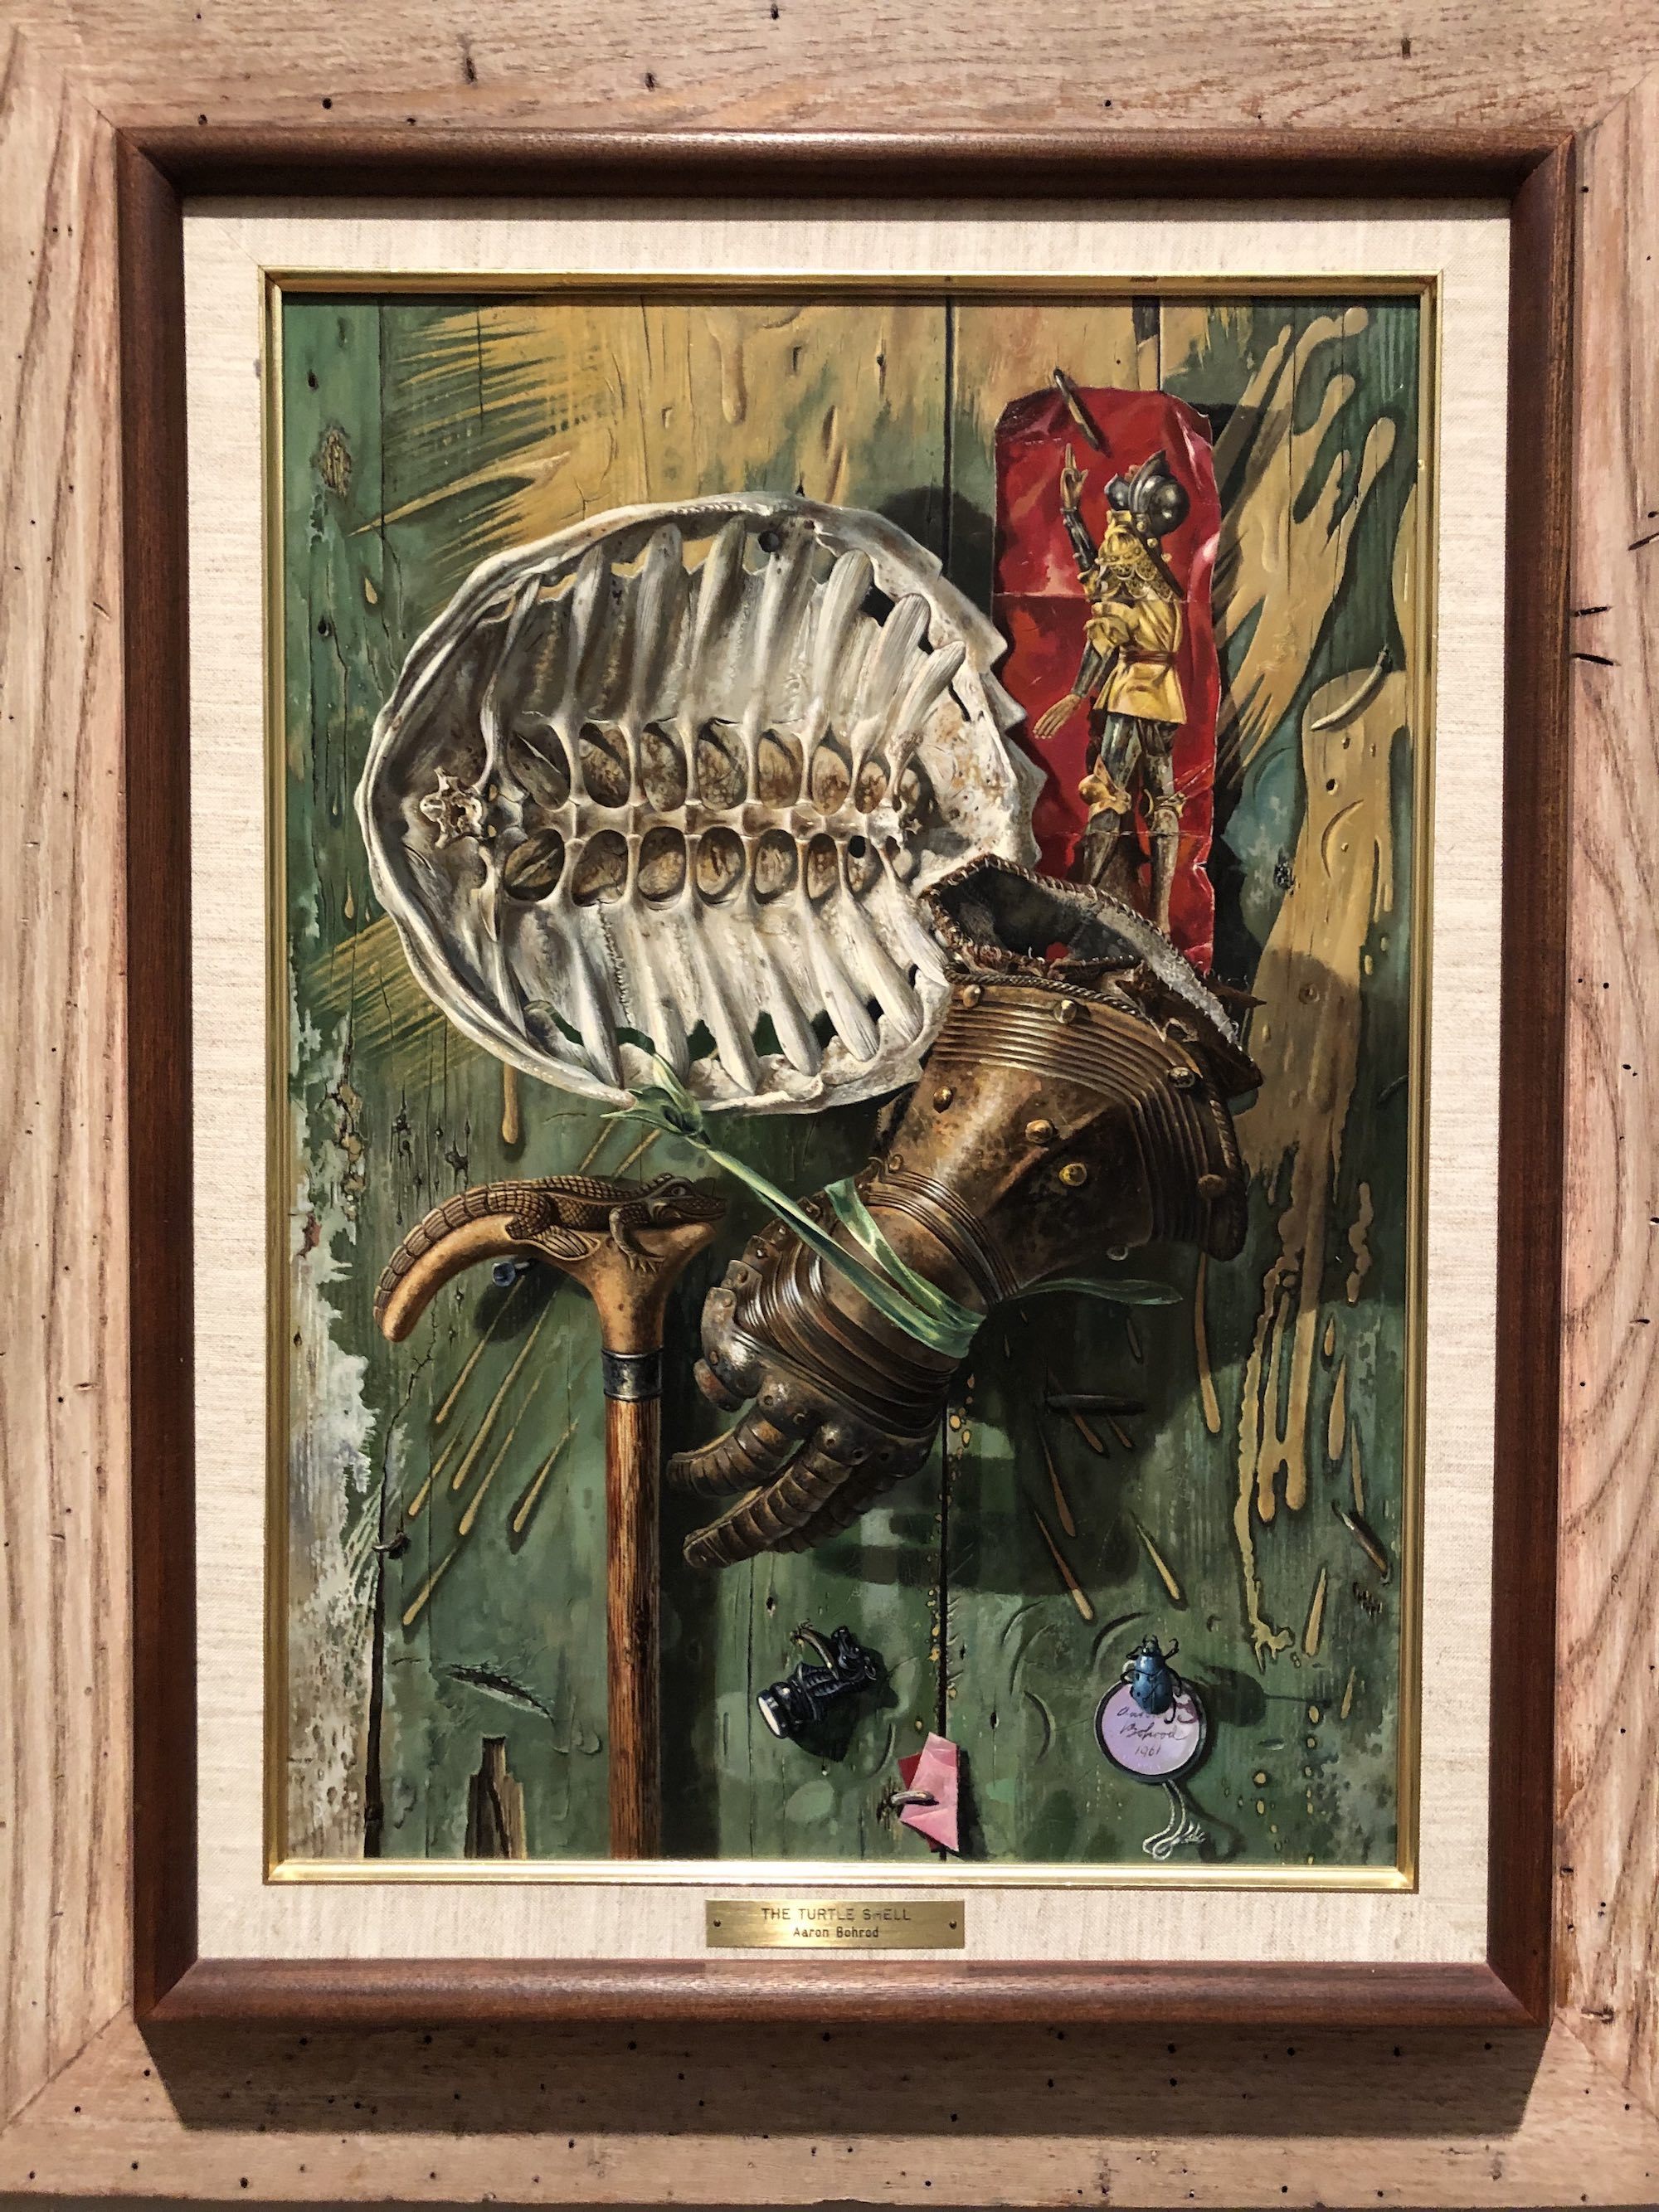 The Turtle Shell by Aaron Bohrod (1961). Oil on hardboard at the Chazen Museum of Art in Madison, Wisconsin.